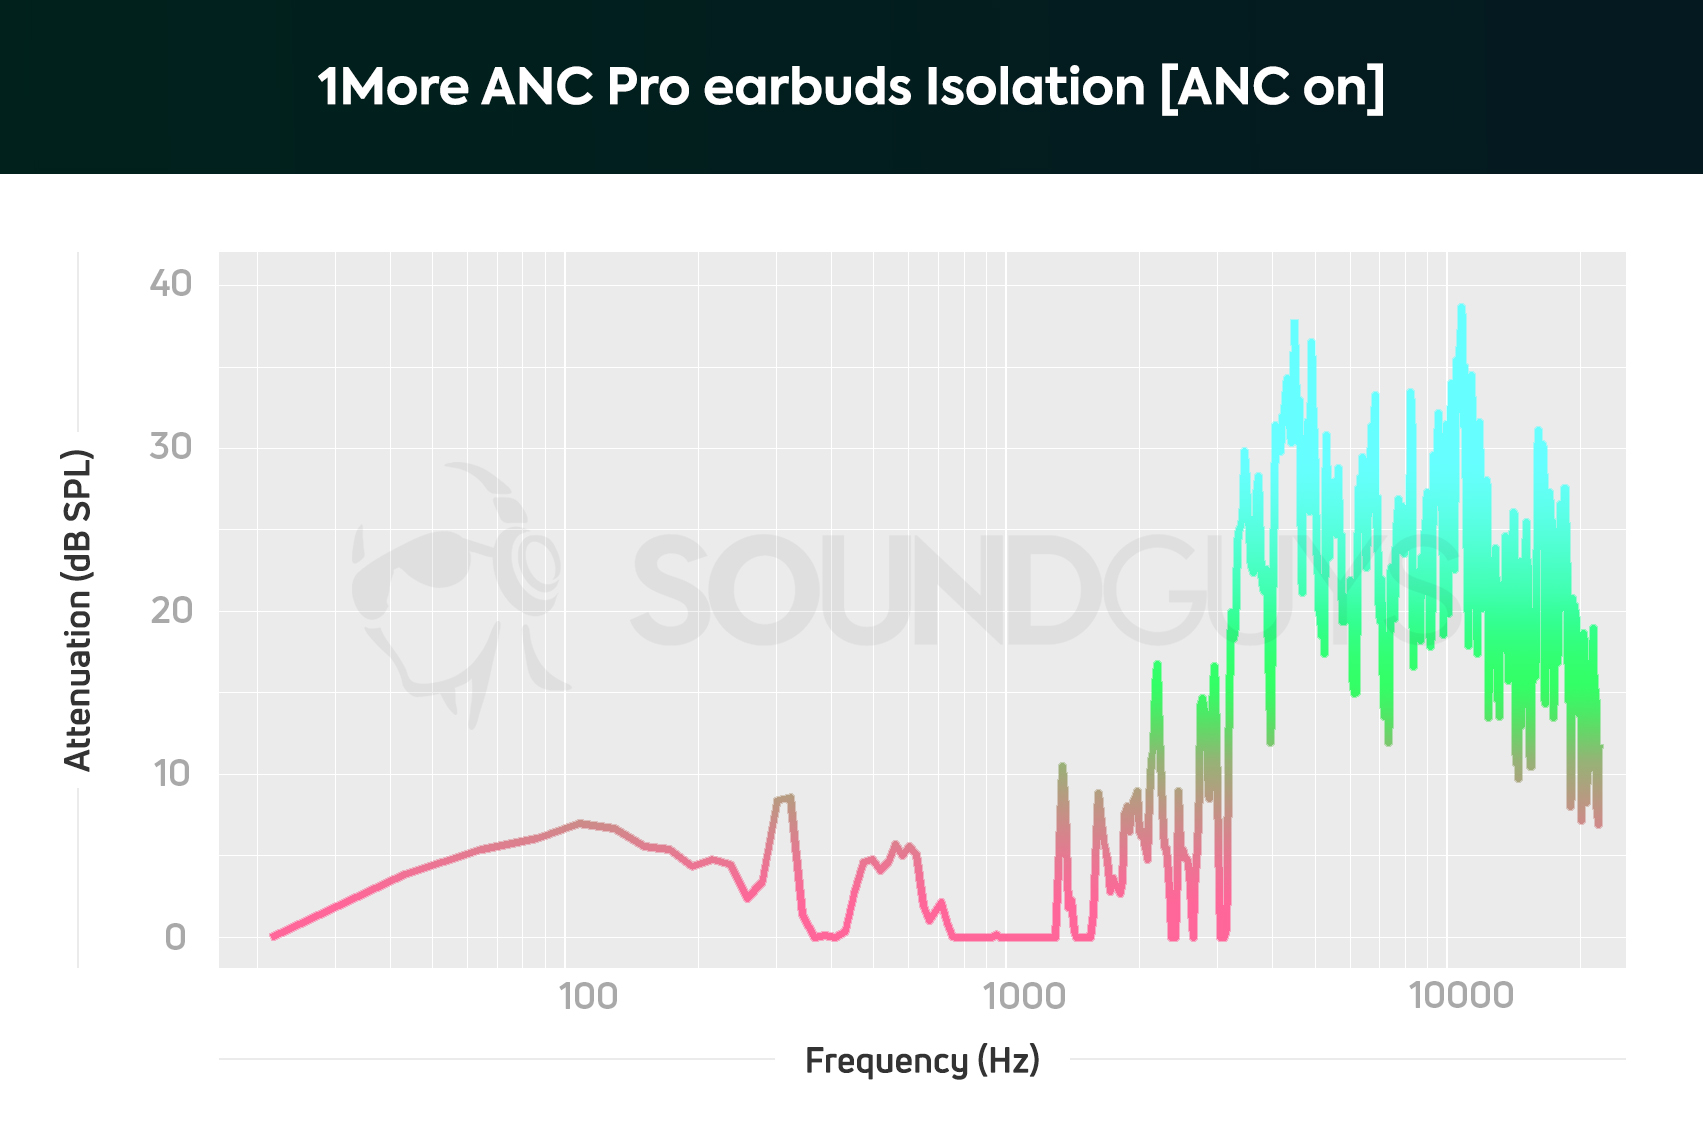 Isolation chart for the 1More Dual Driver ANC Pro earbuds with noise canceling turned on showing an increase in the cancellation of frequencies 800Hz and below